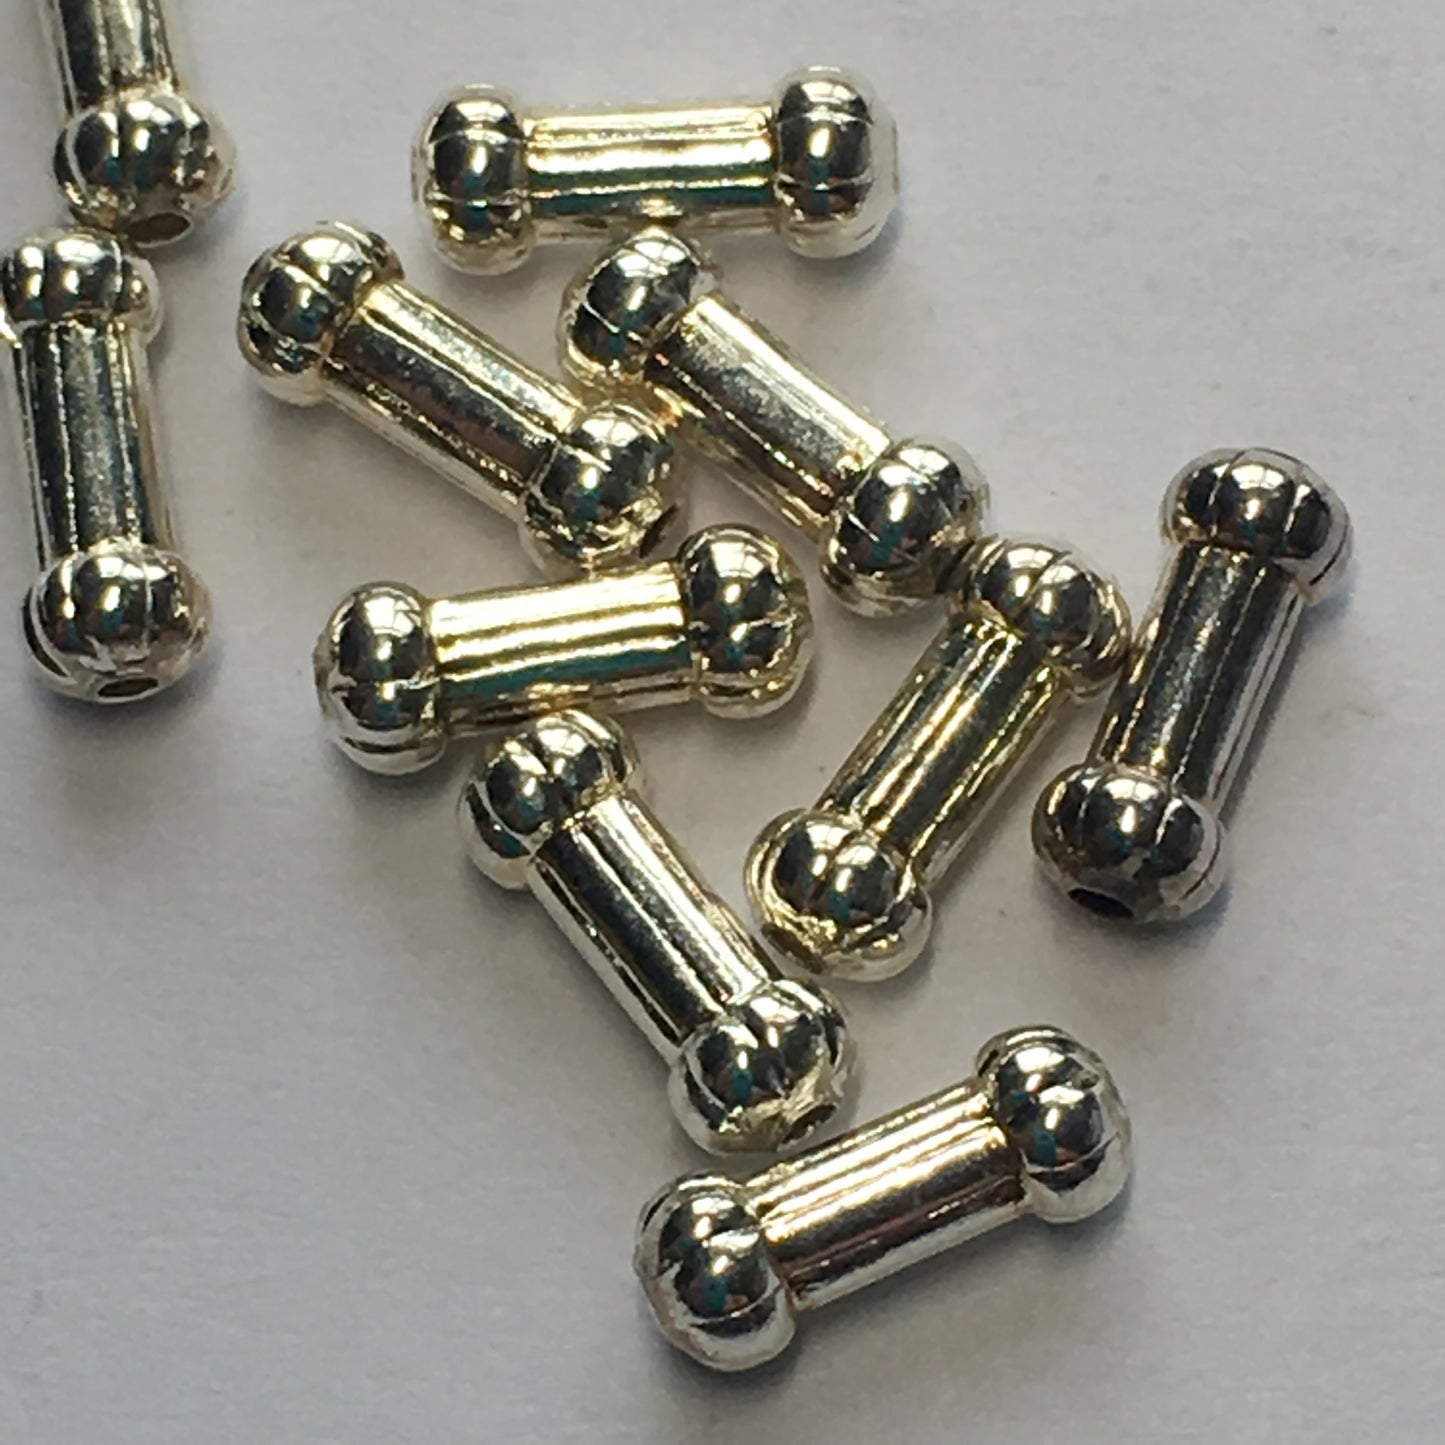 Bright Silver Bone-Shaped Spacer Beads, 7 mm length, 2 mm ends - 10 Beads